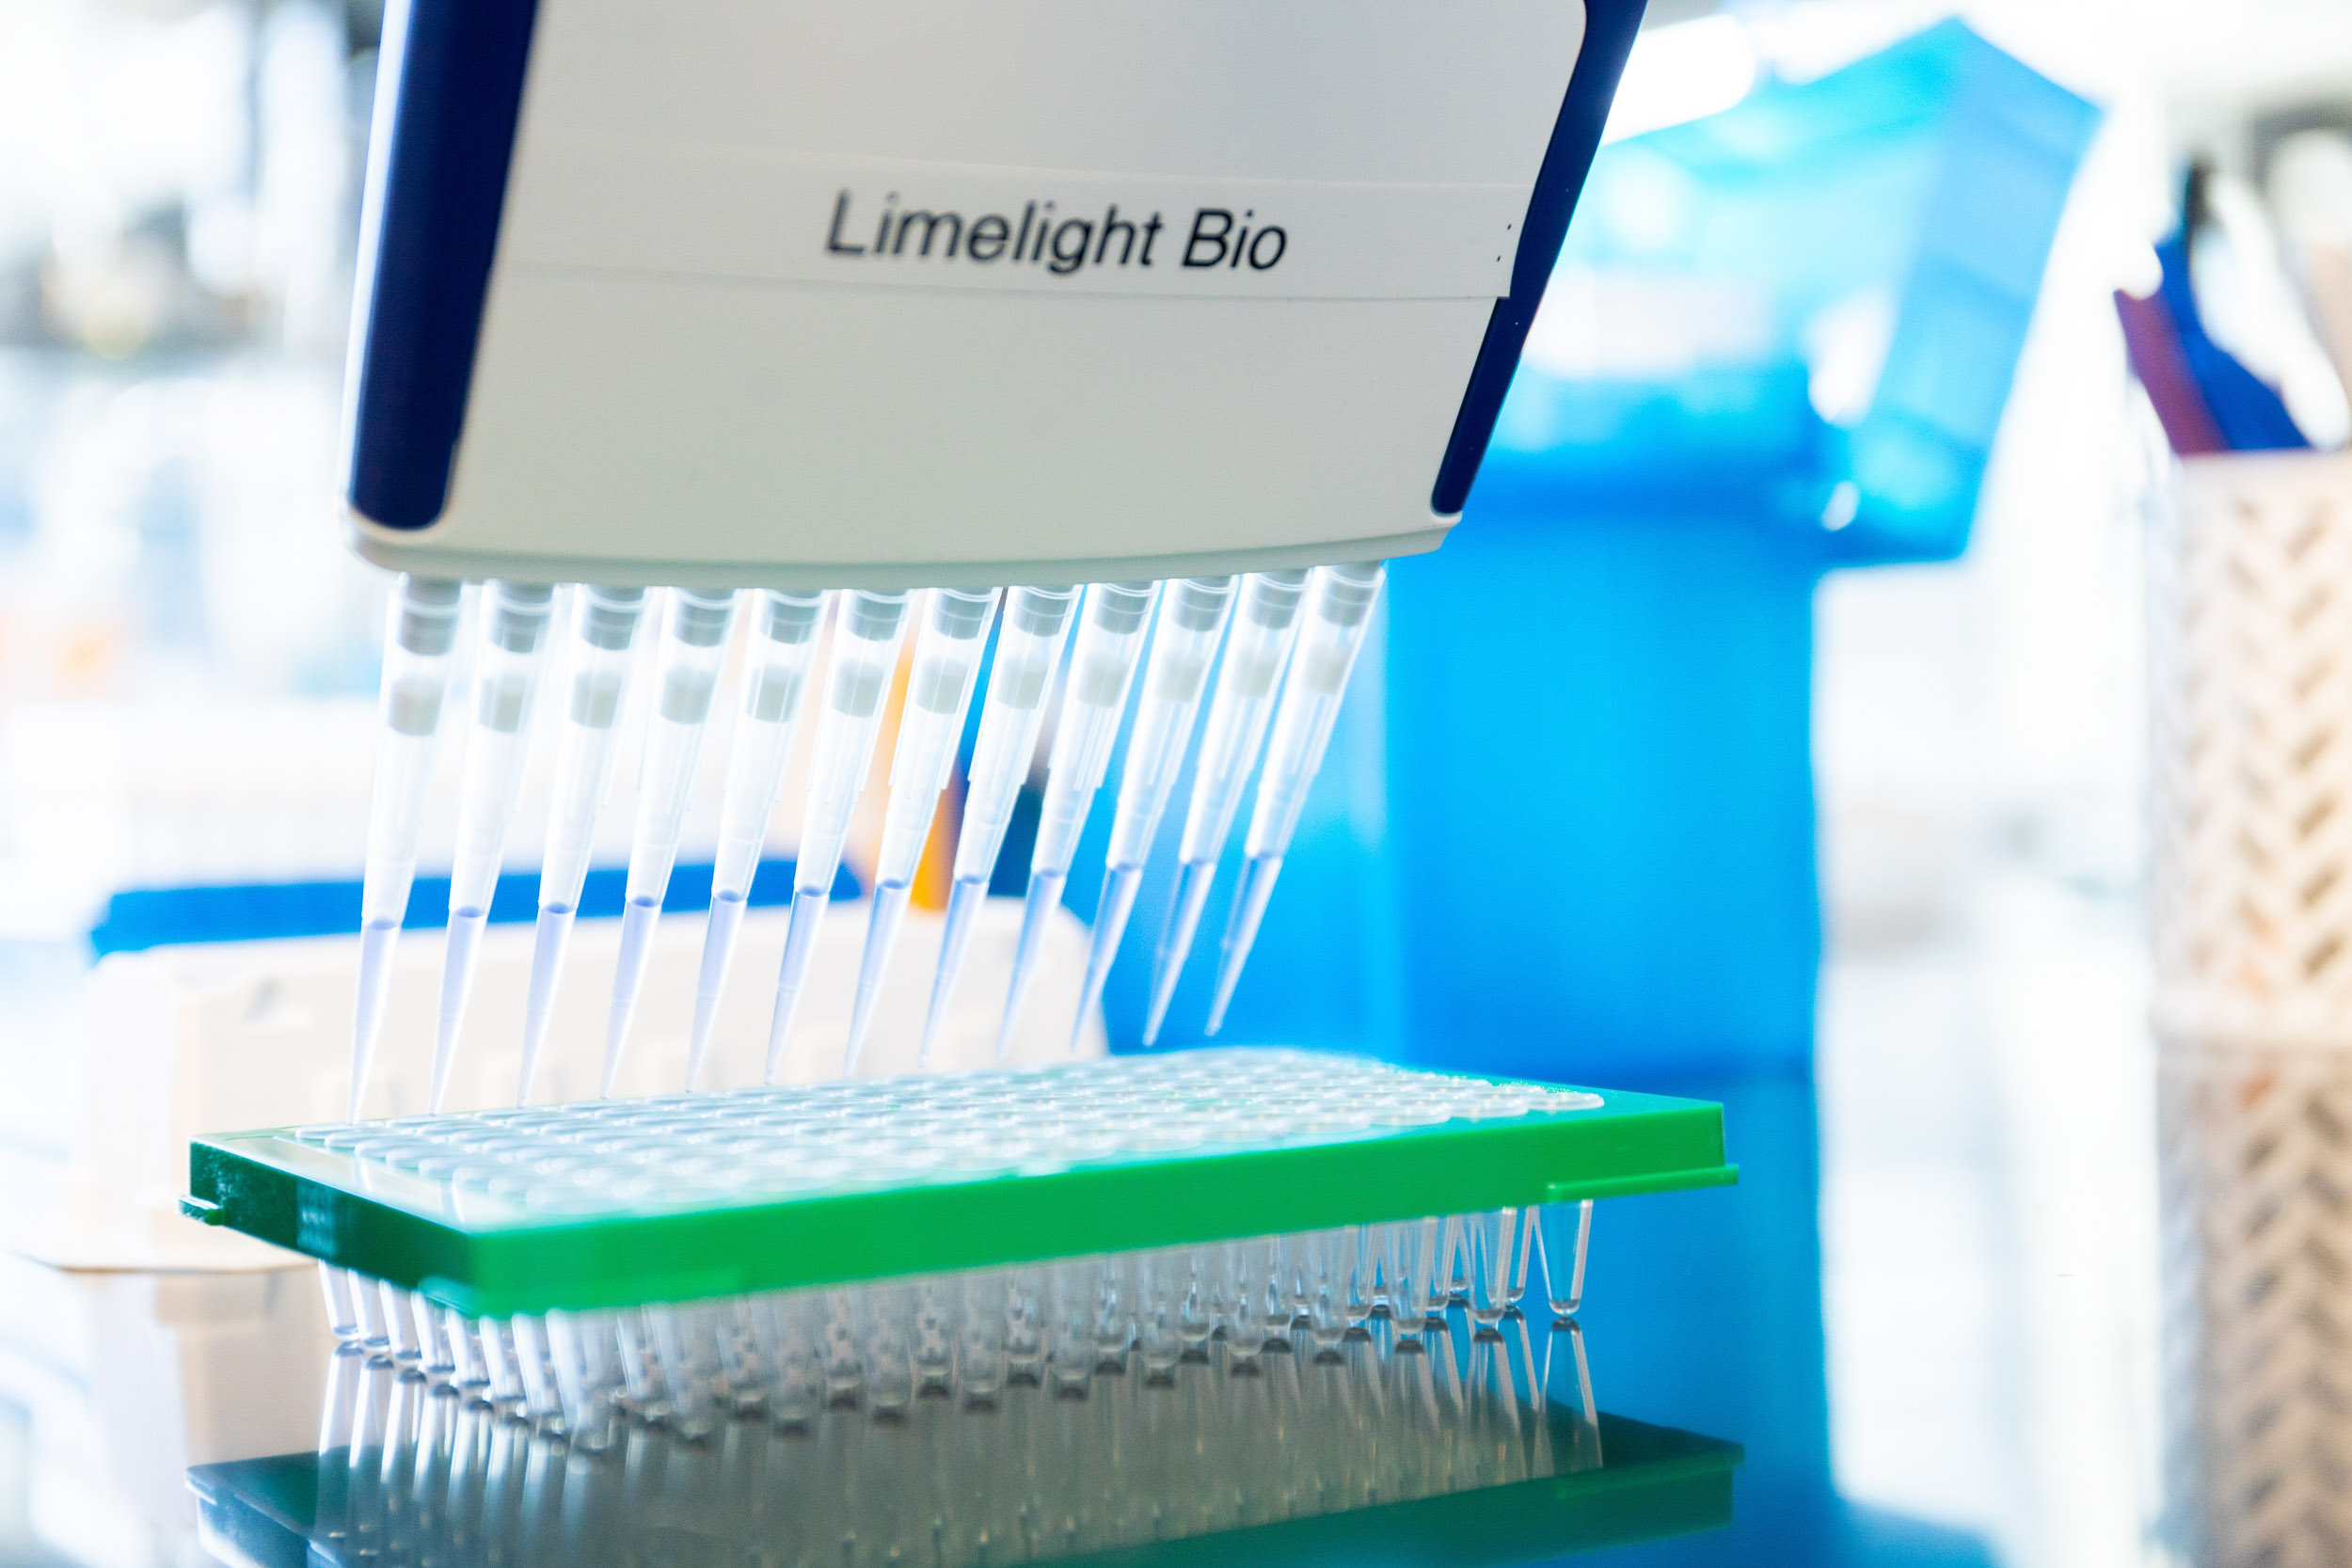 Limelight Bio pipettes lab Pennovation science  Michael Branscom Photography.